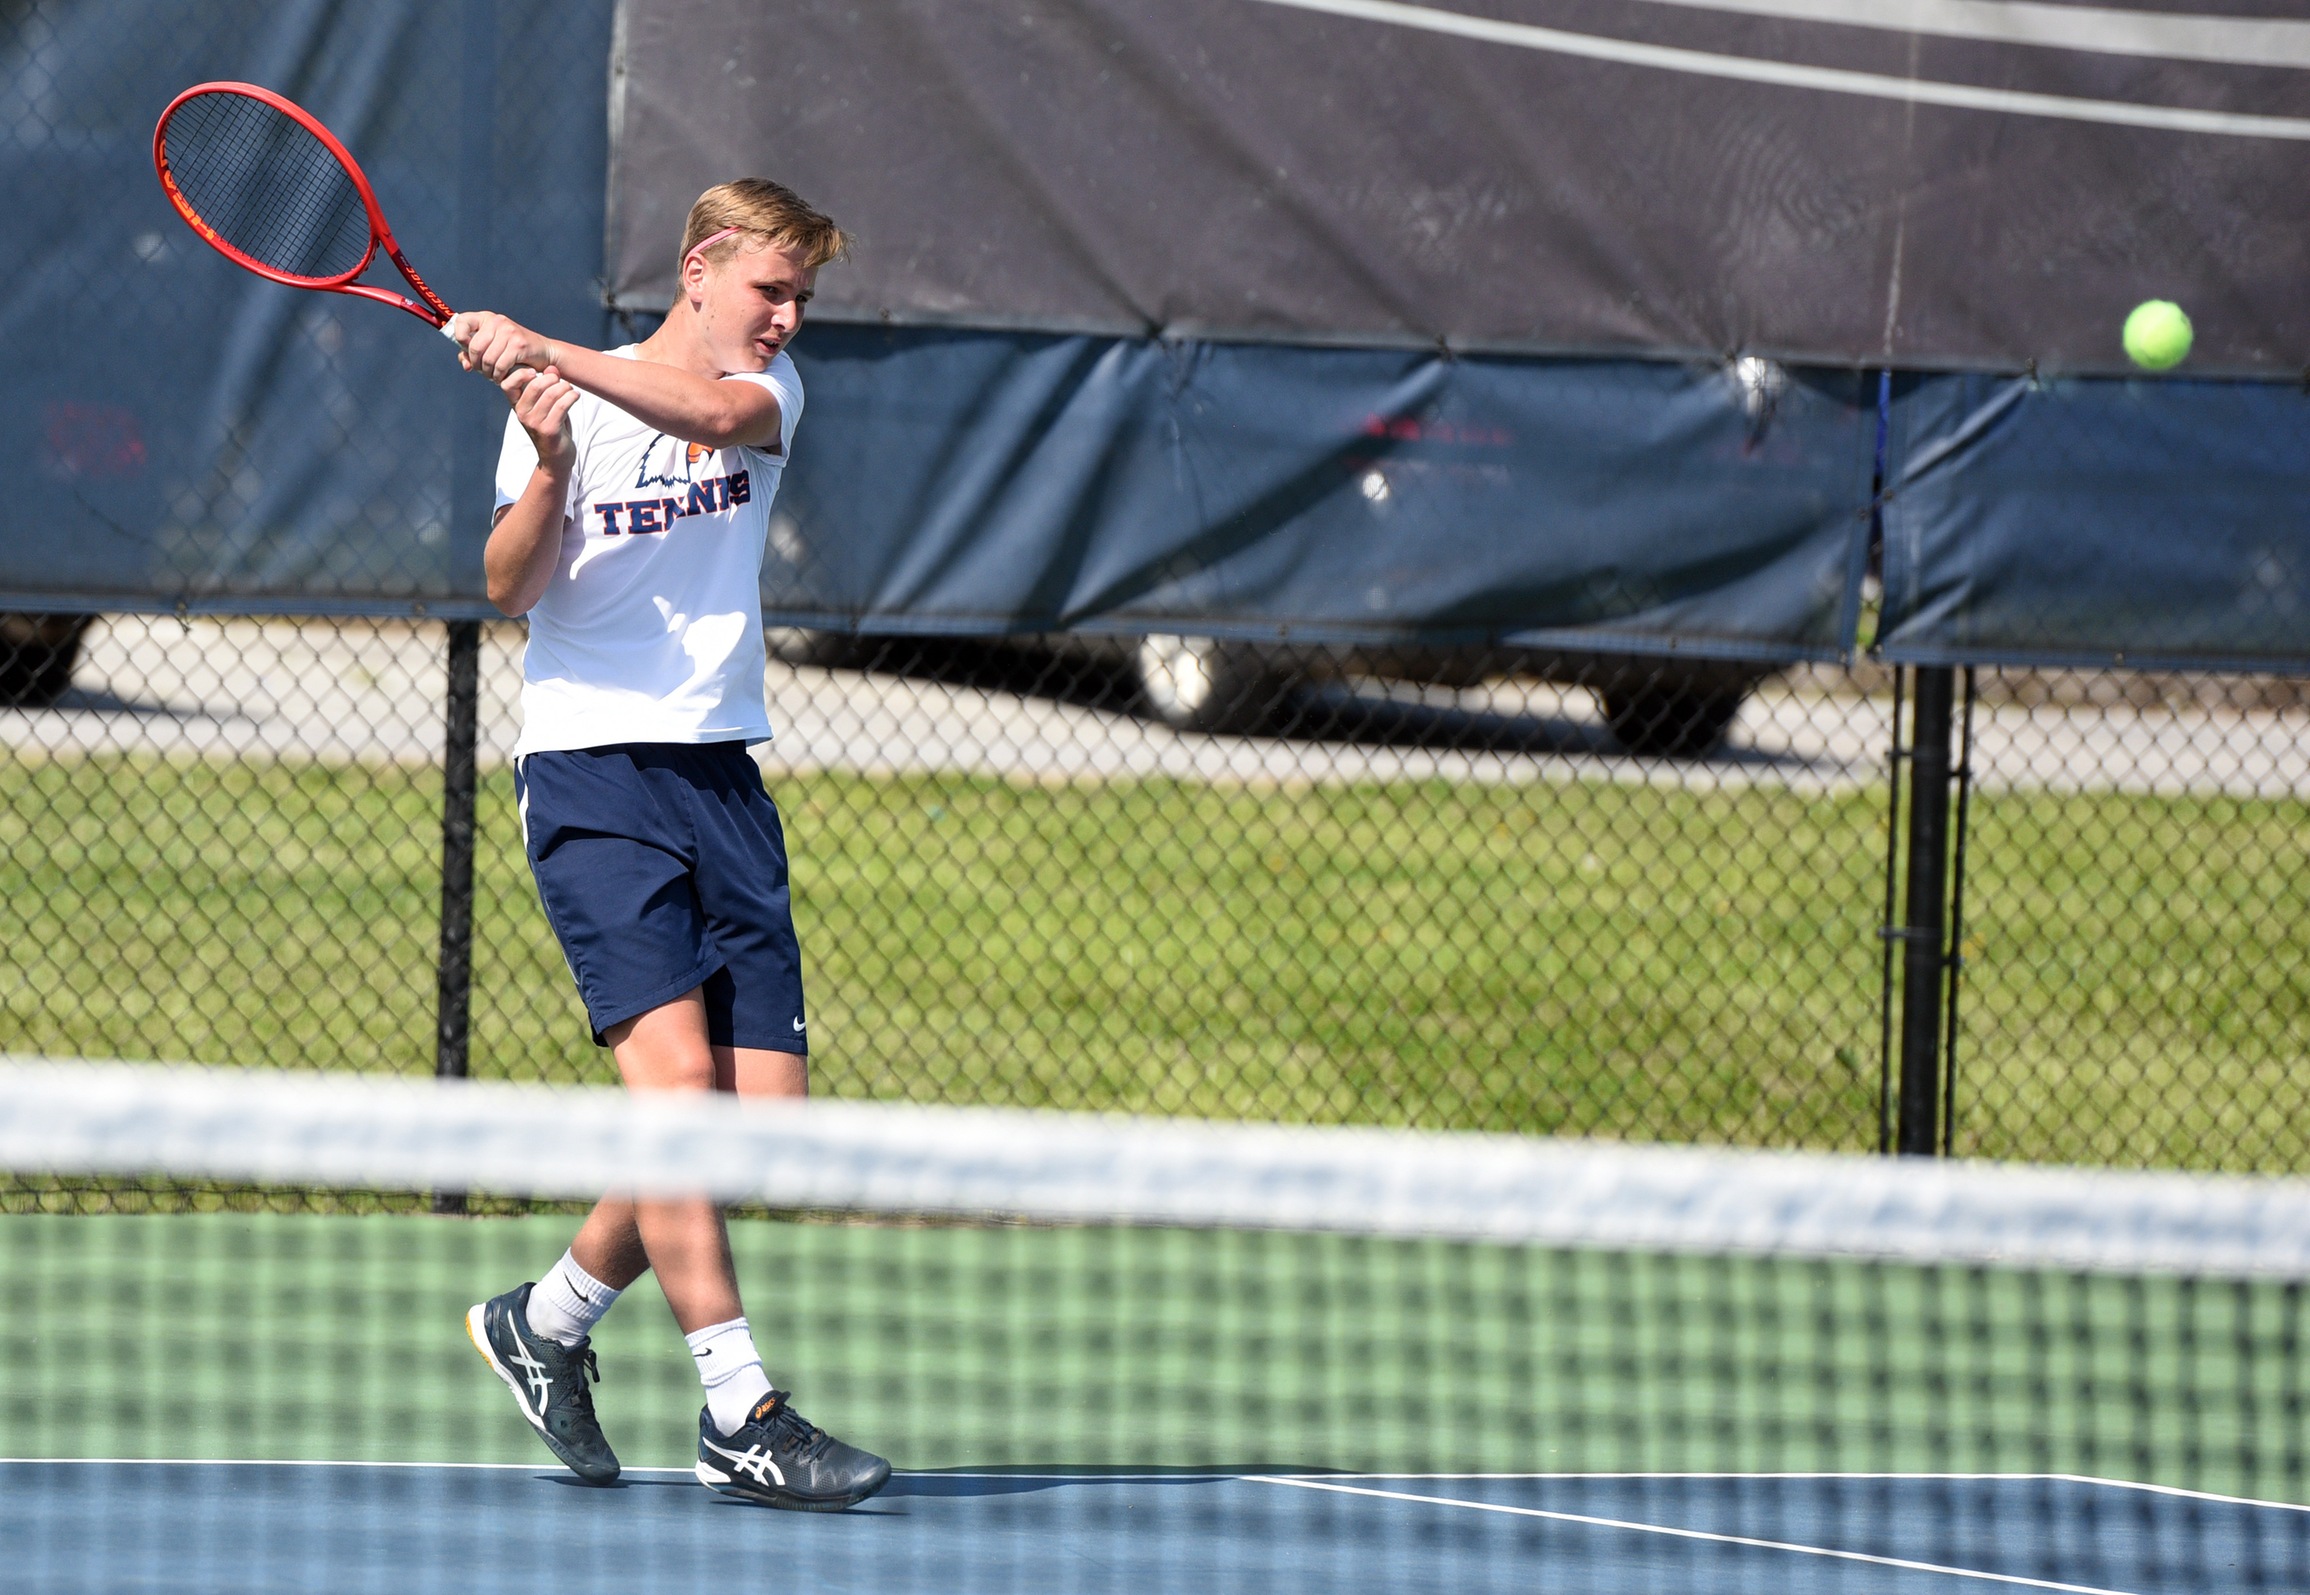 Trio of newcomers lead Eagles after day one of Wingate Invite